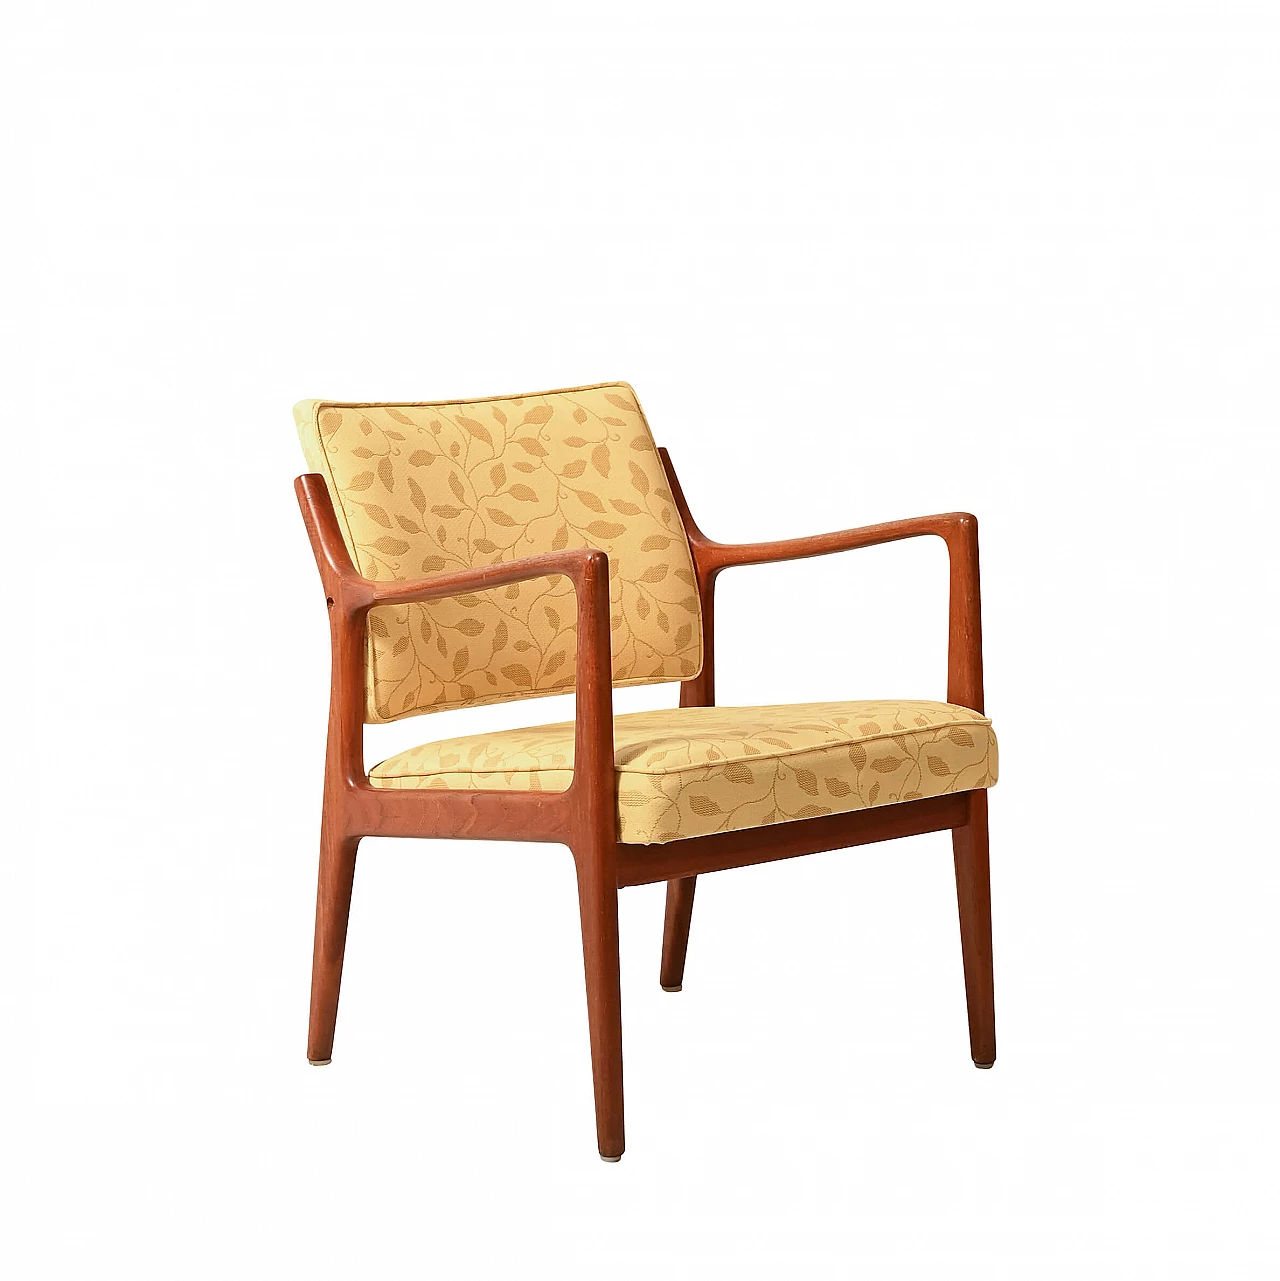 Teak armchair with embroidered fabric 1145163